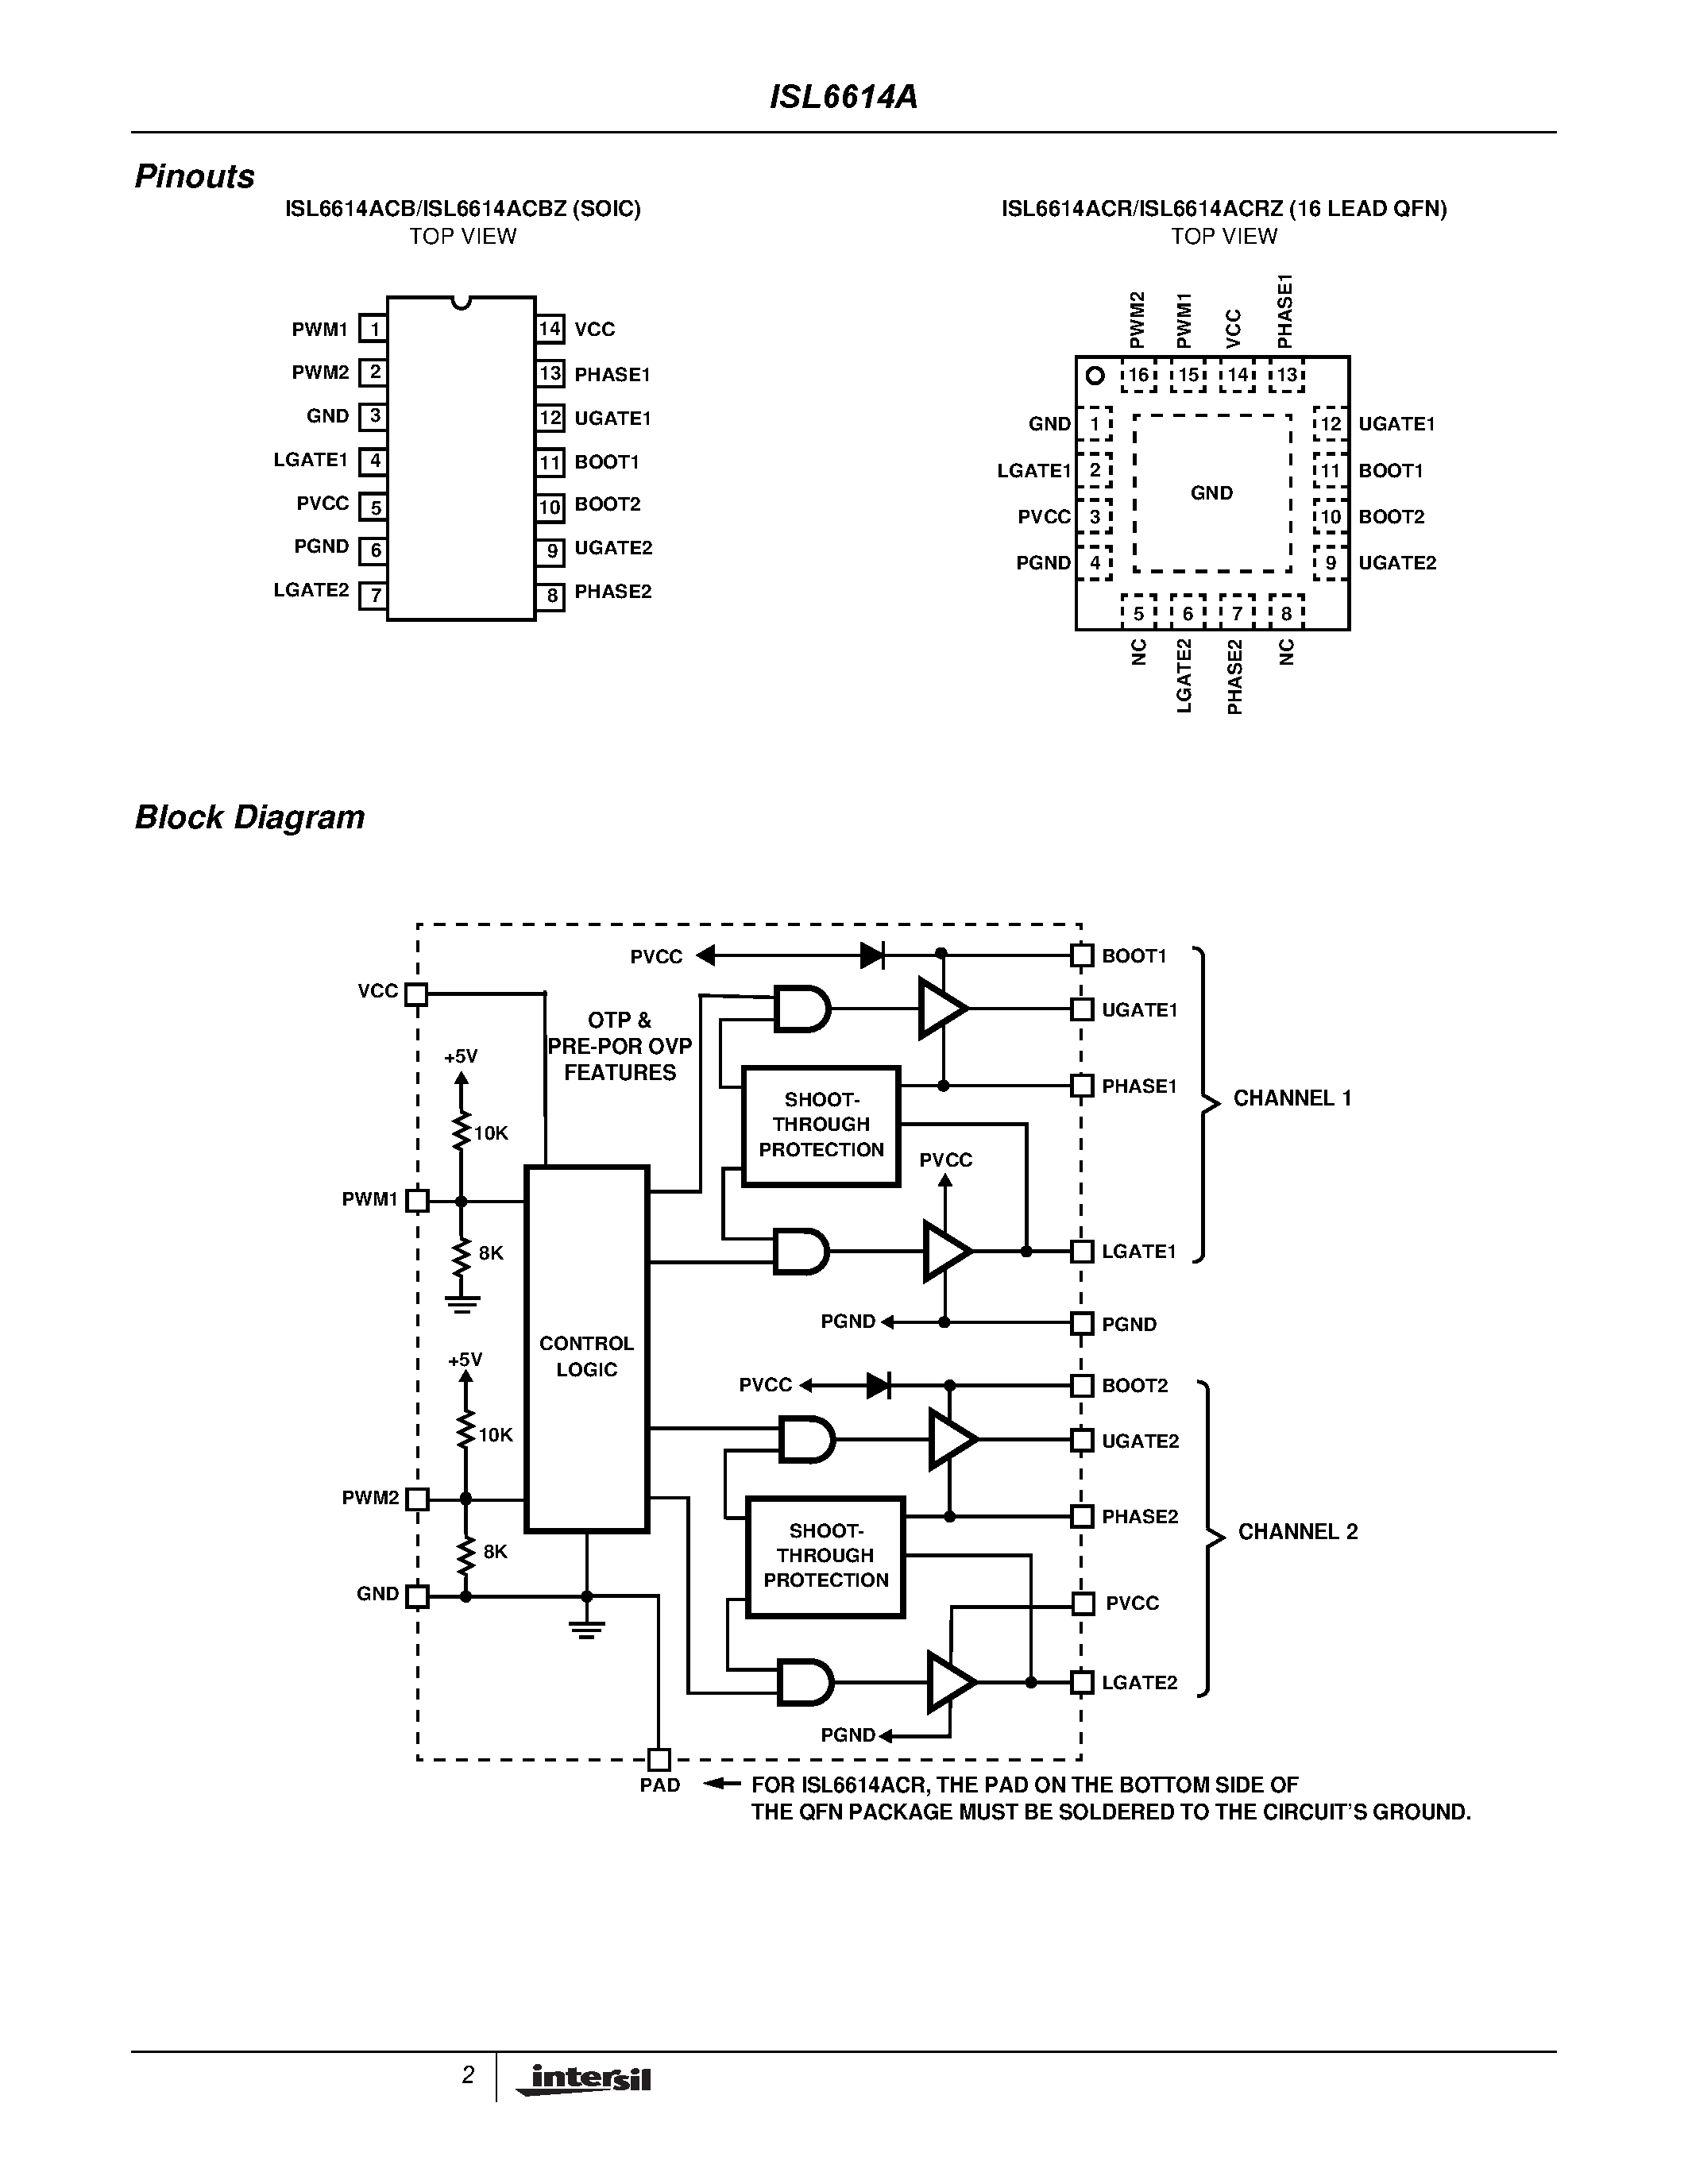 Datasheet ISL6614ACRZ - Dual Advanced Synchronous Rectified Buck MOSFET Drivers with Pre-POR OVP page 2